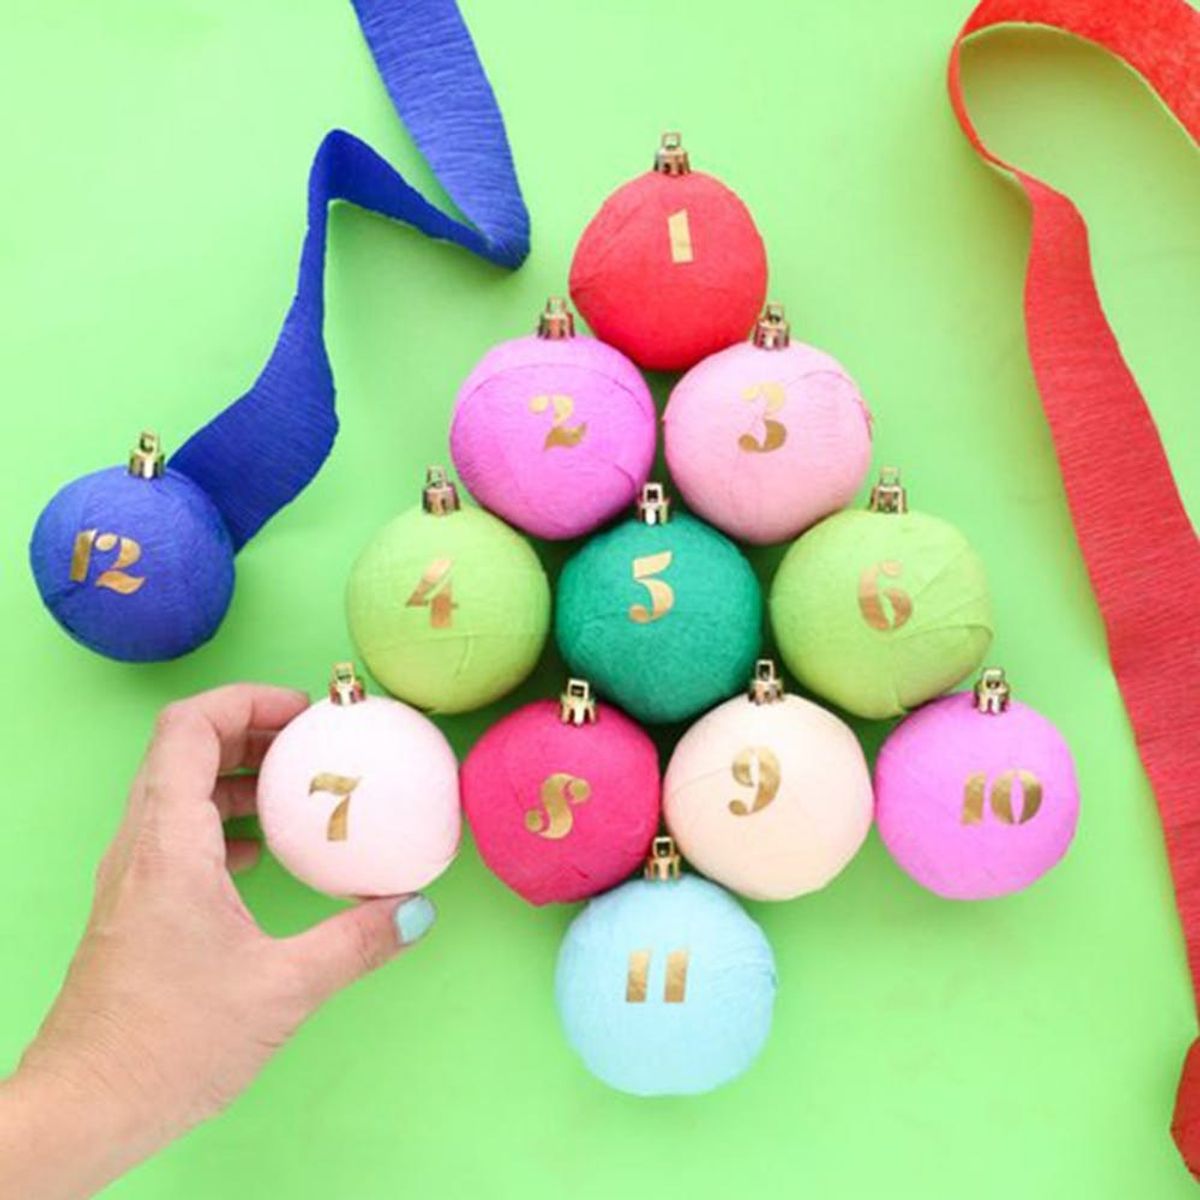 Peppermint Bath Bombs, Pom-Pom Gift Toppers, and More Holiday Craft Projects